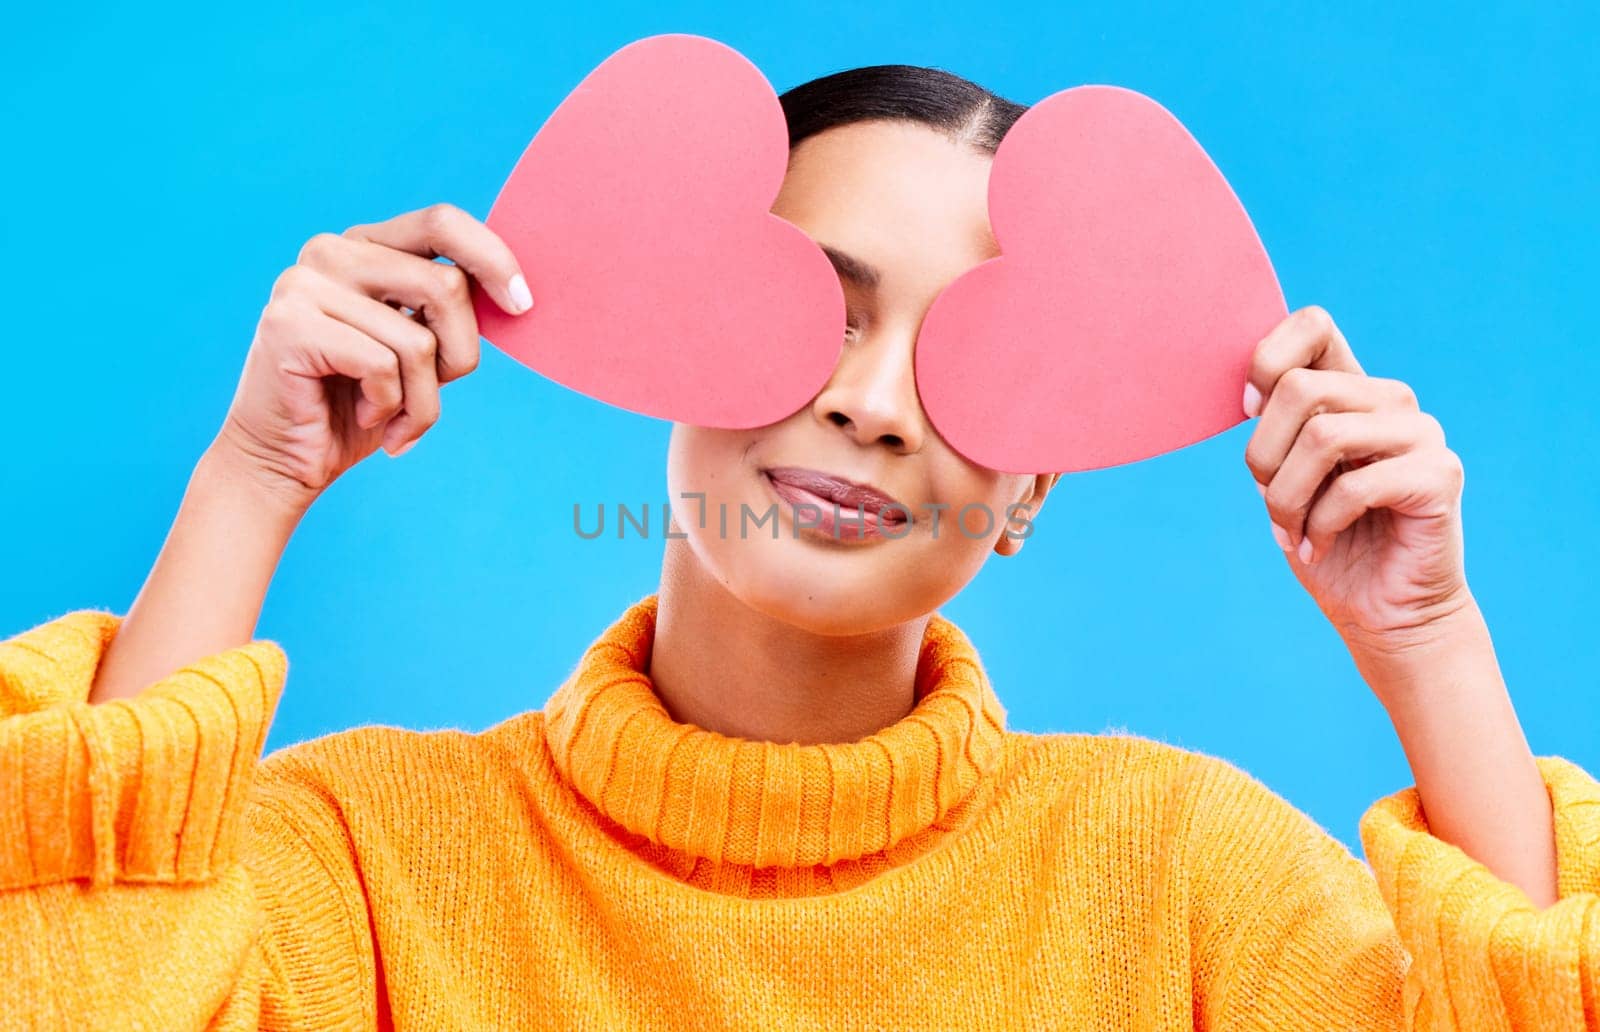 Heart eyes, cover and woman smile with happiness and excited for love, valentines day or studio emoji. Happy, loving or person on isolated blue background, creative romance paper and show care symbol.